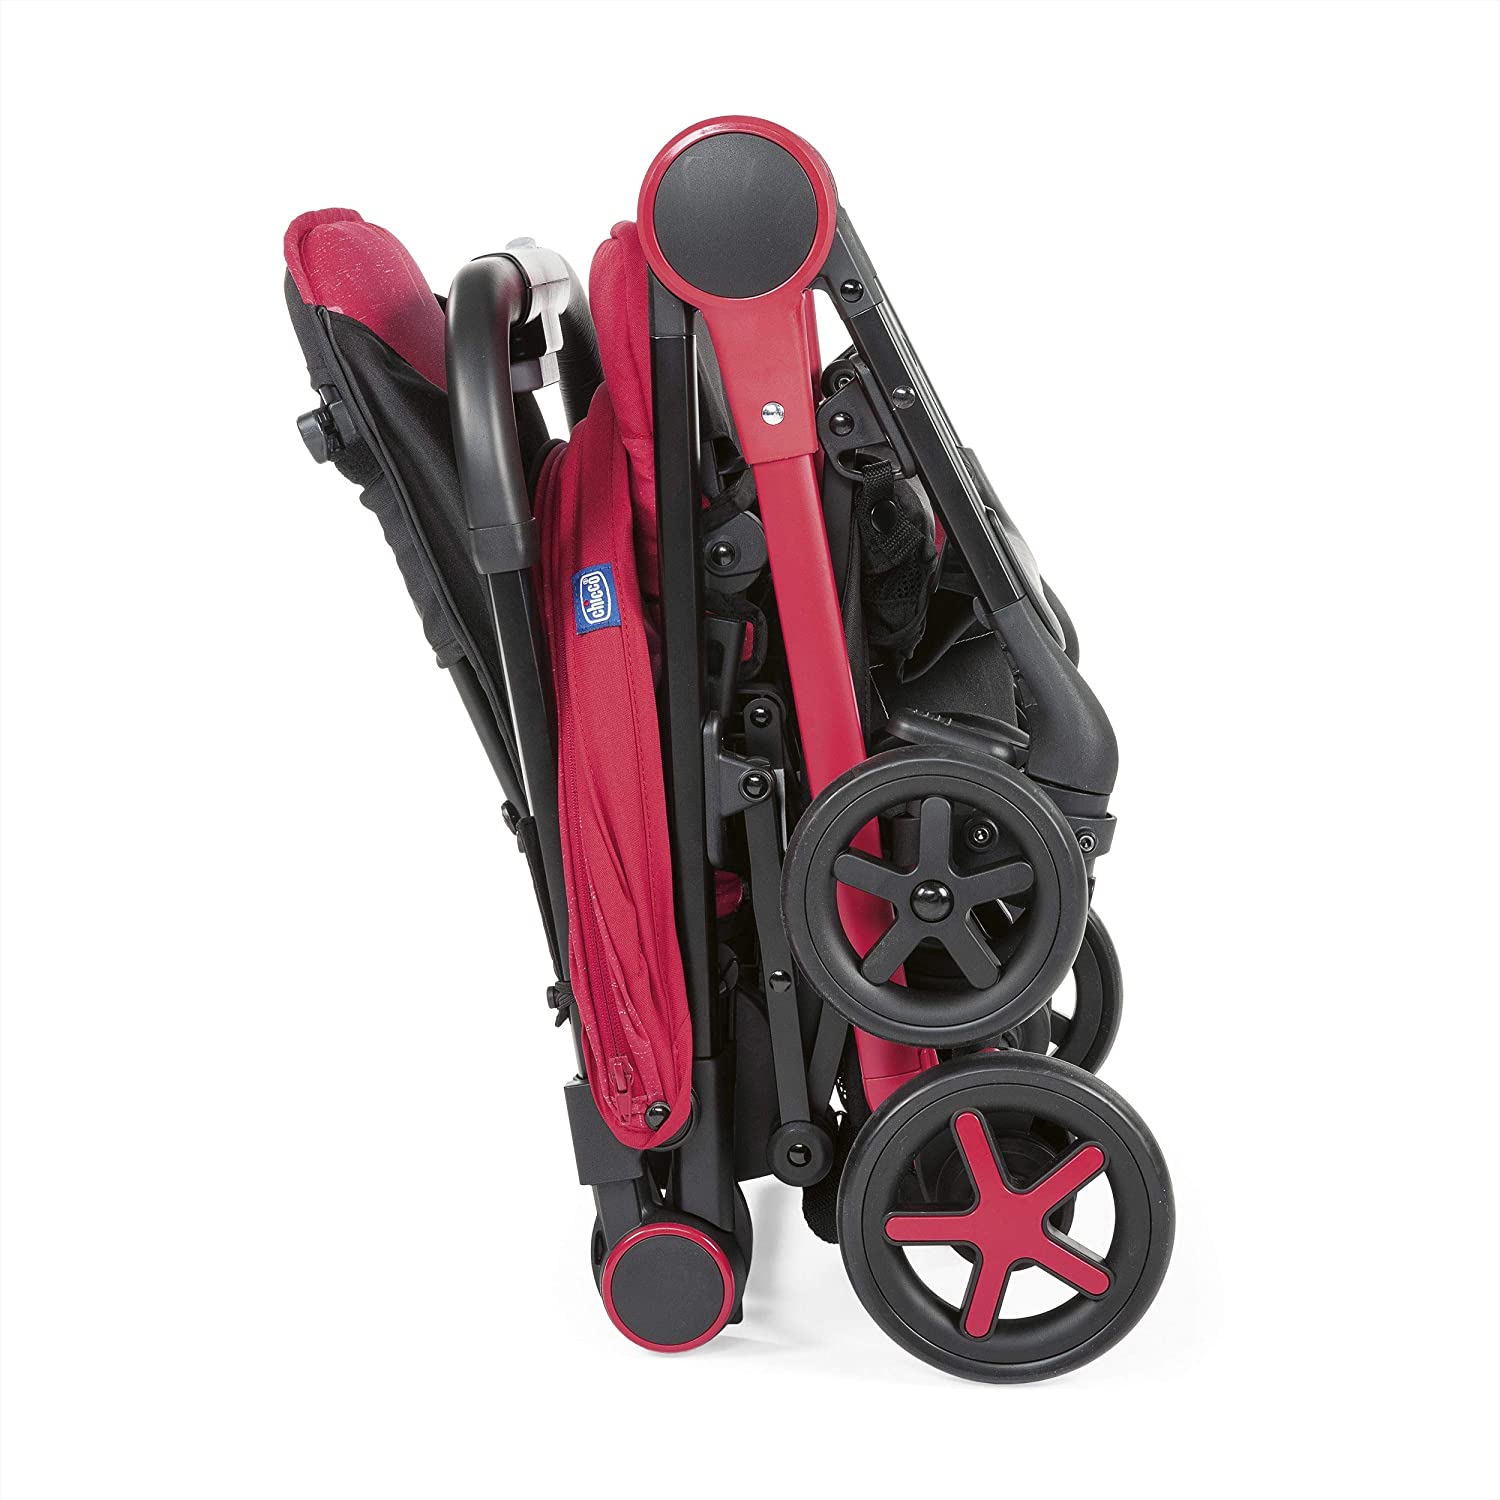 Chicco Miinimo3 Stroller 0M-6M, Red Passion